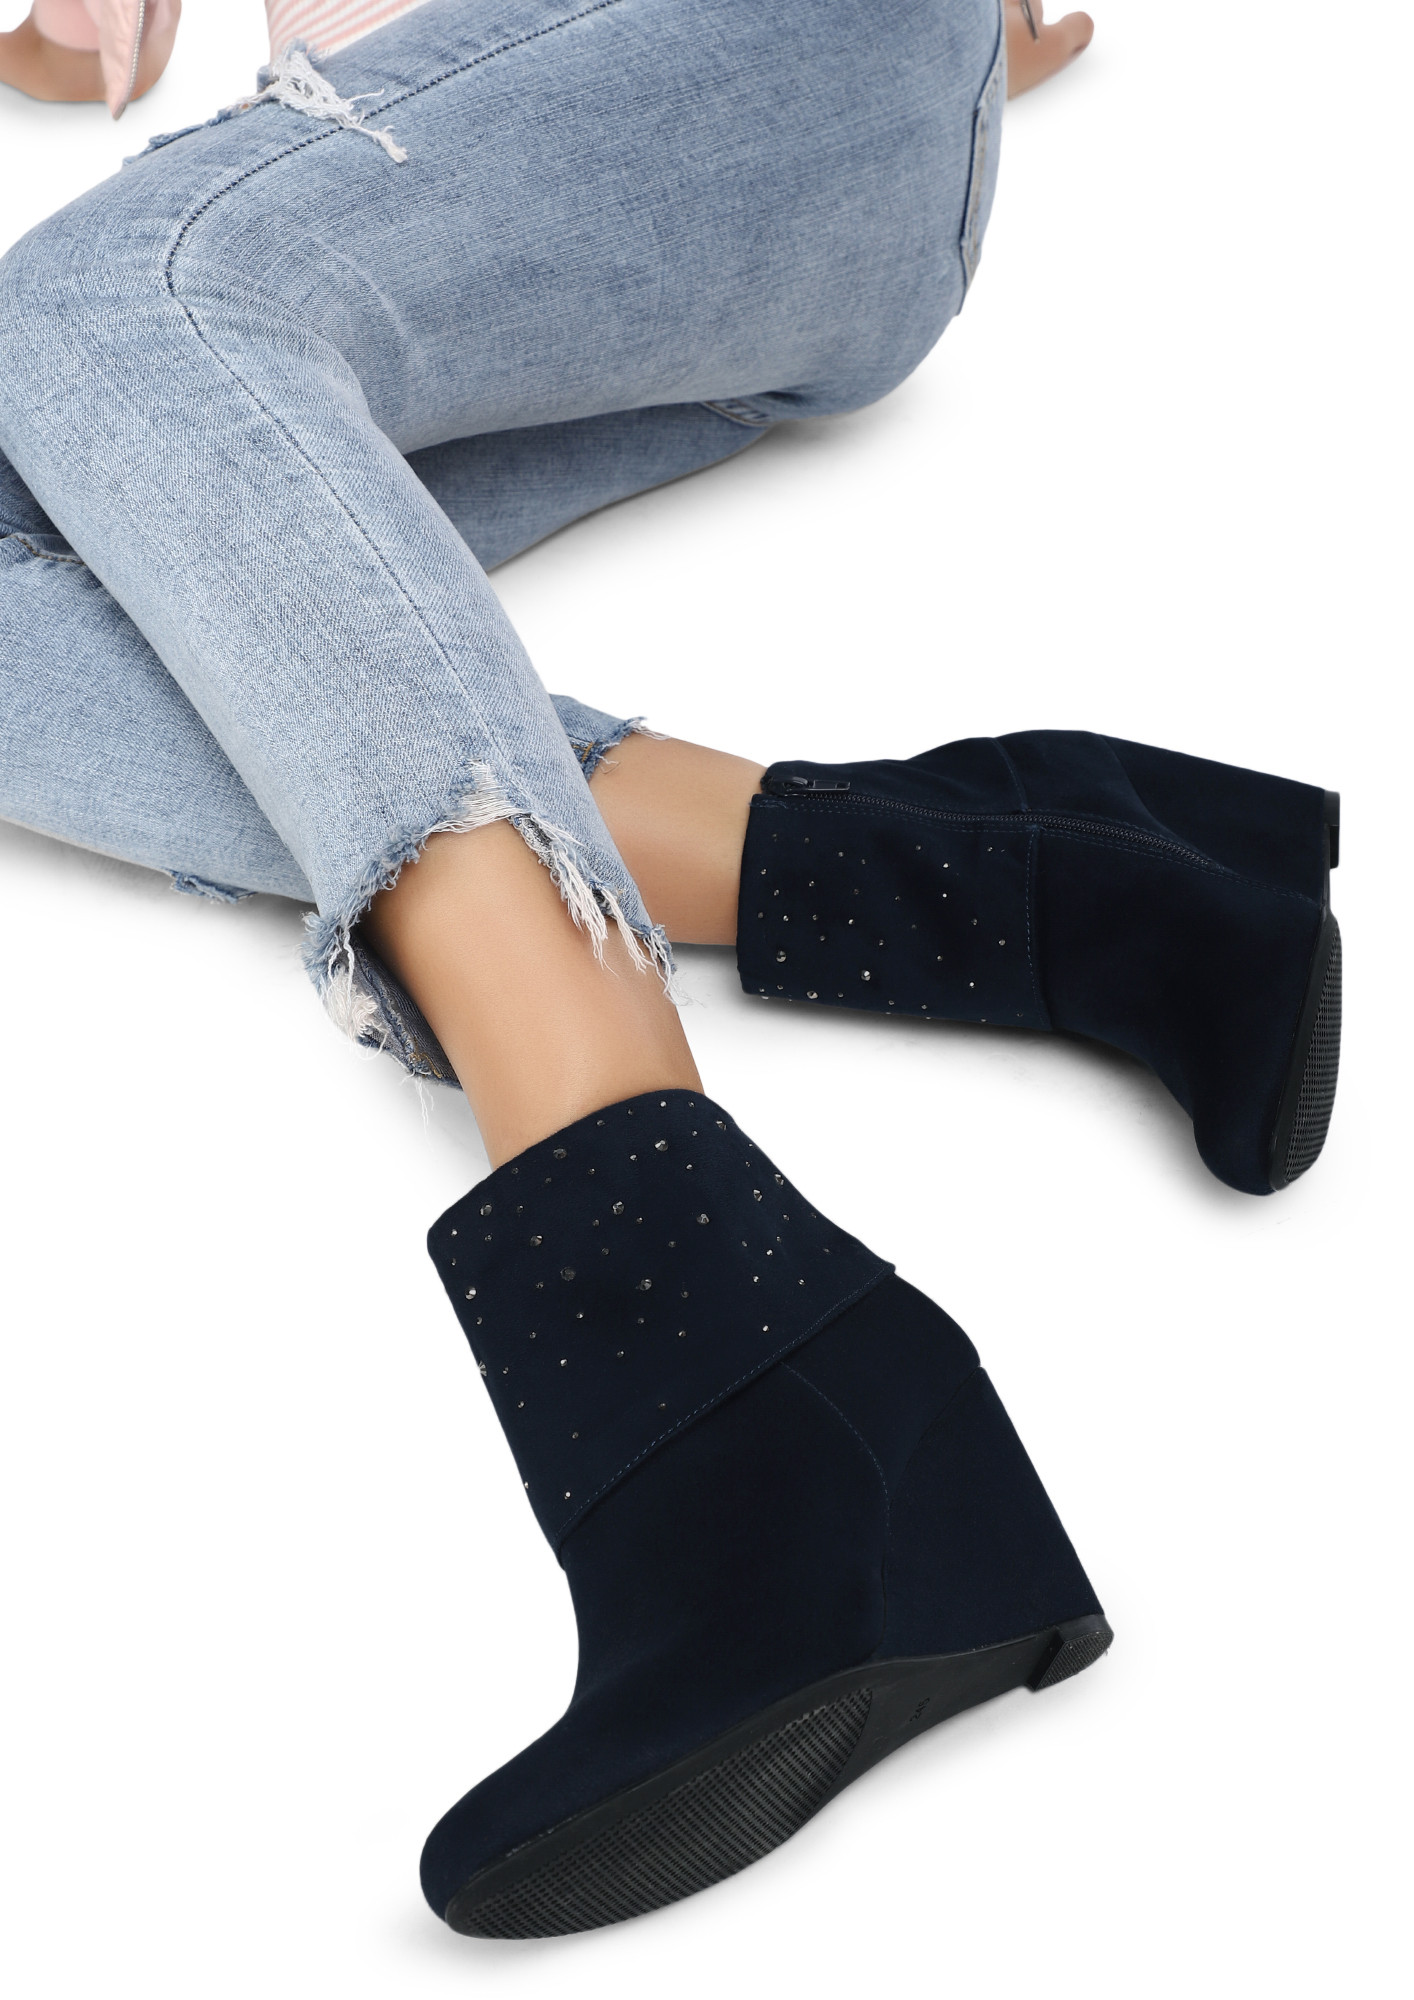 STARS UNDER A DARK SKY BLUE ANKLE BOOTS